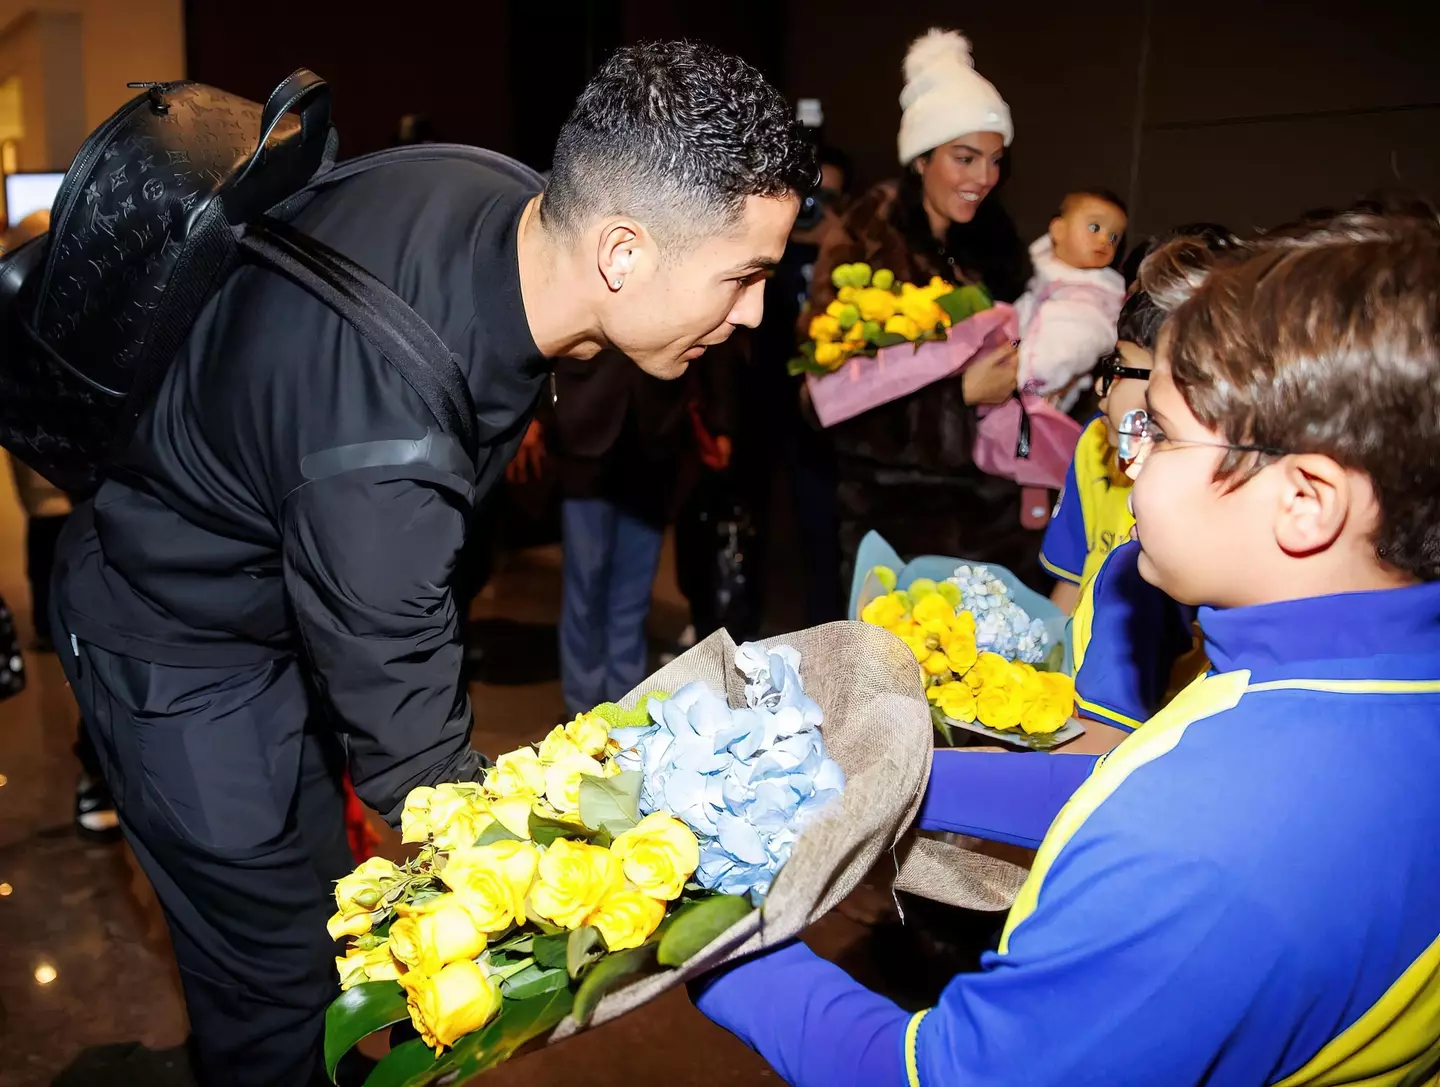 Cristiano Ronaldo welcomed by Al Nassr fans at King Khalid International Airport in Saudi Arabia on Monday.